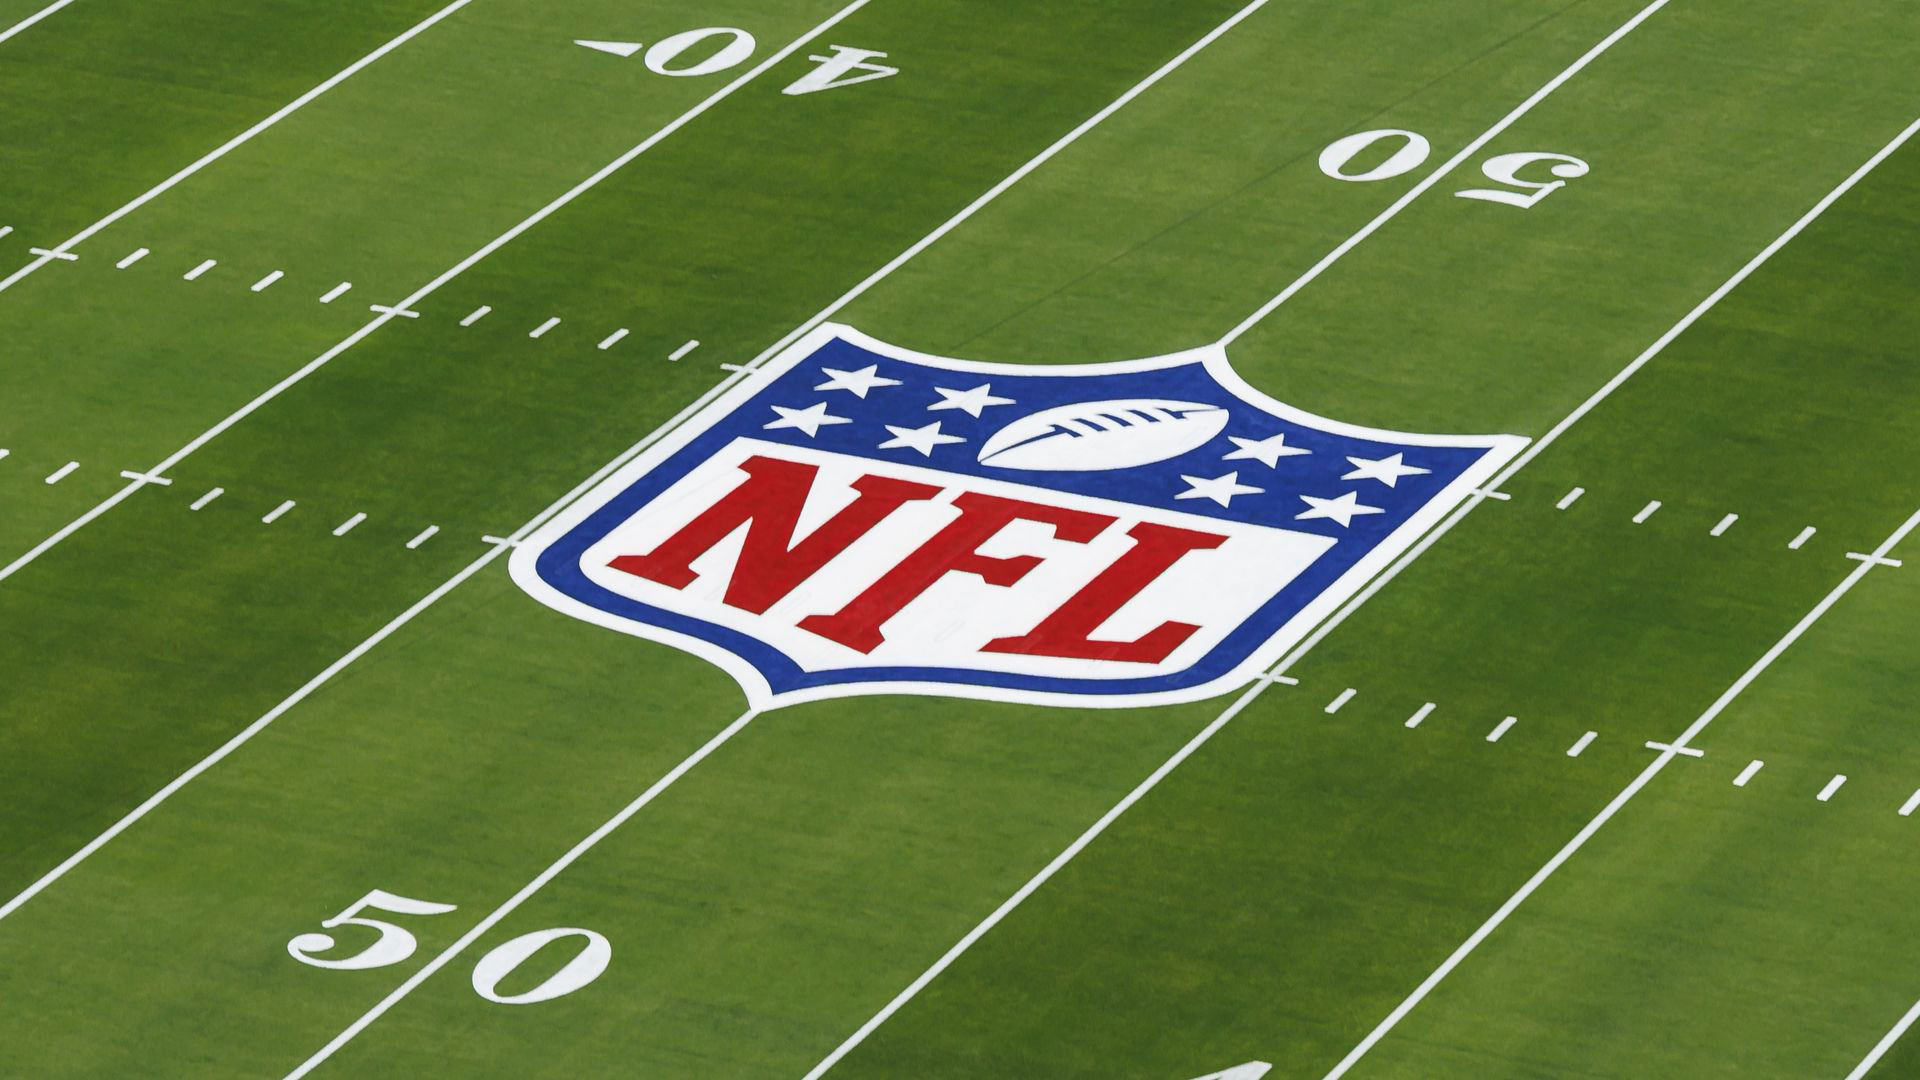 FleurdeLinks, March 26 Rule changes coming to the NFL